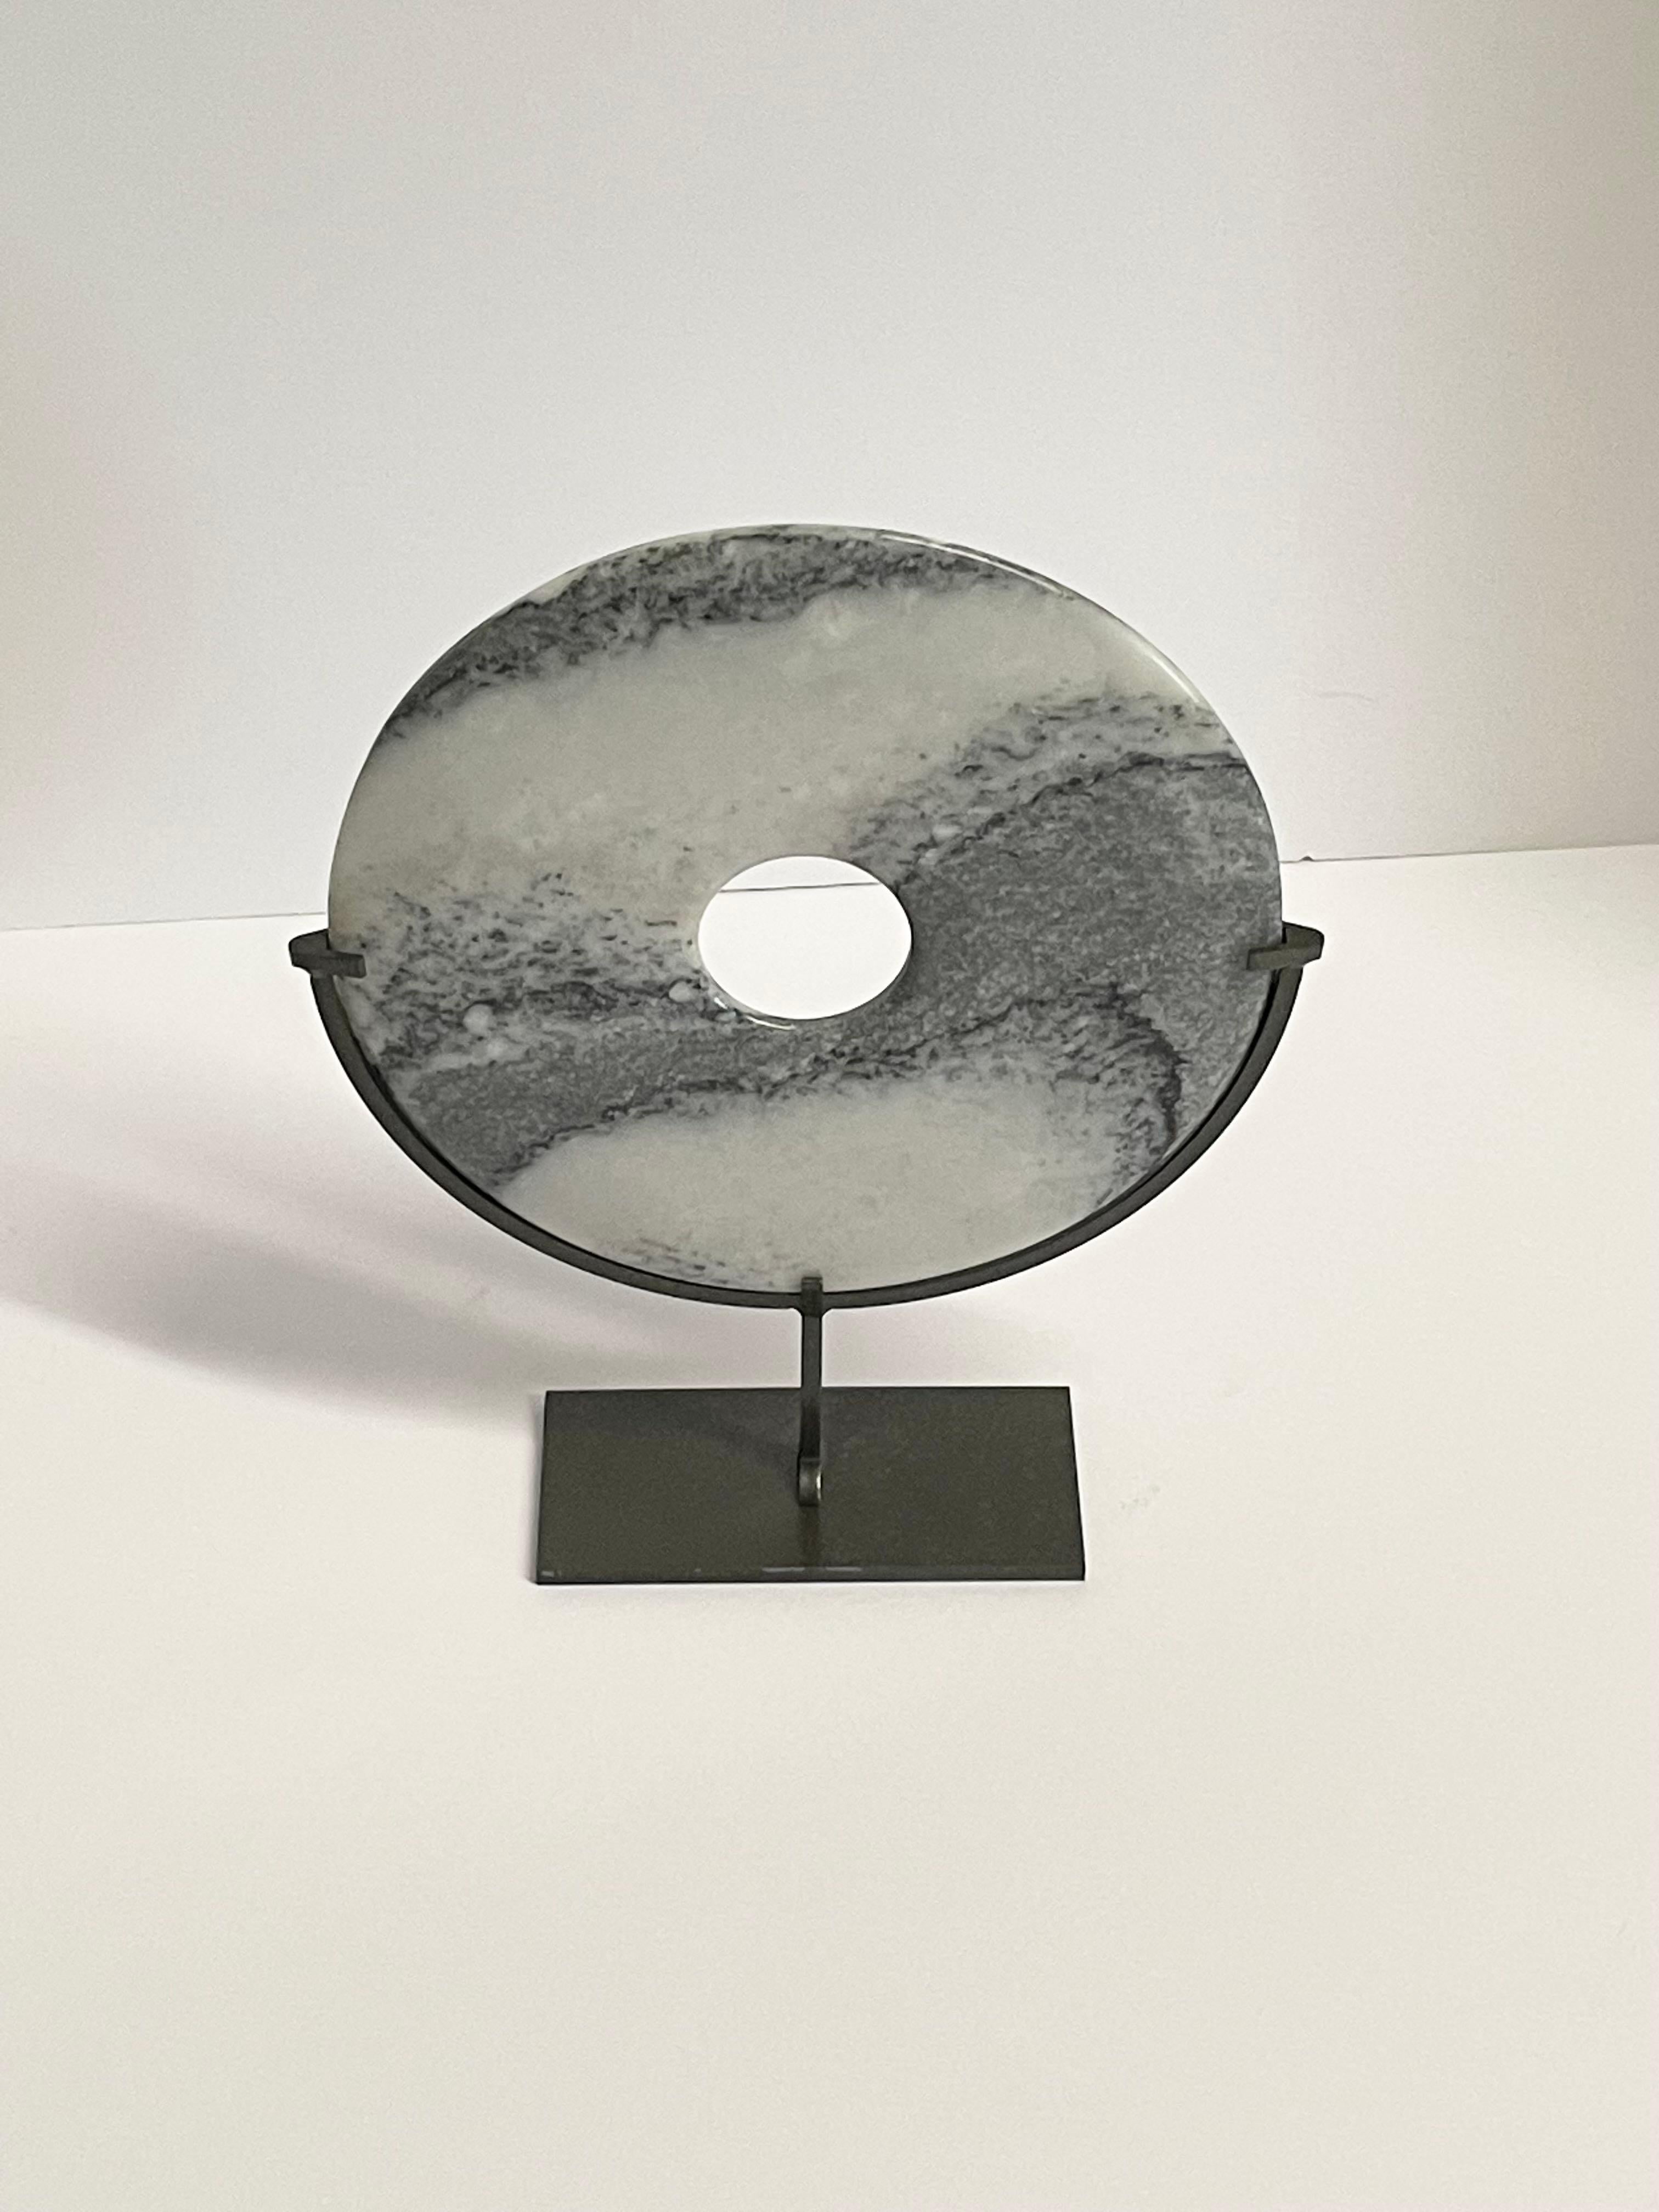 Contemporary Chinese shades of grey and white marble disc on steel stand.
Others available to make a larger grouping.